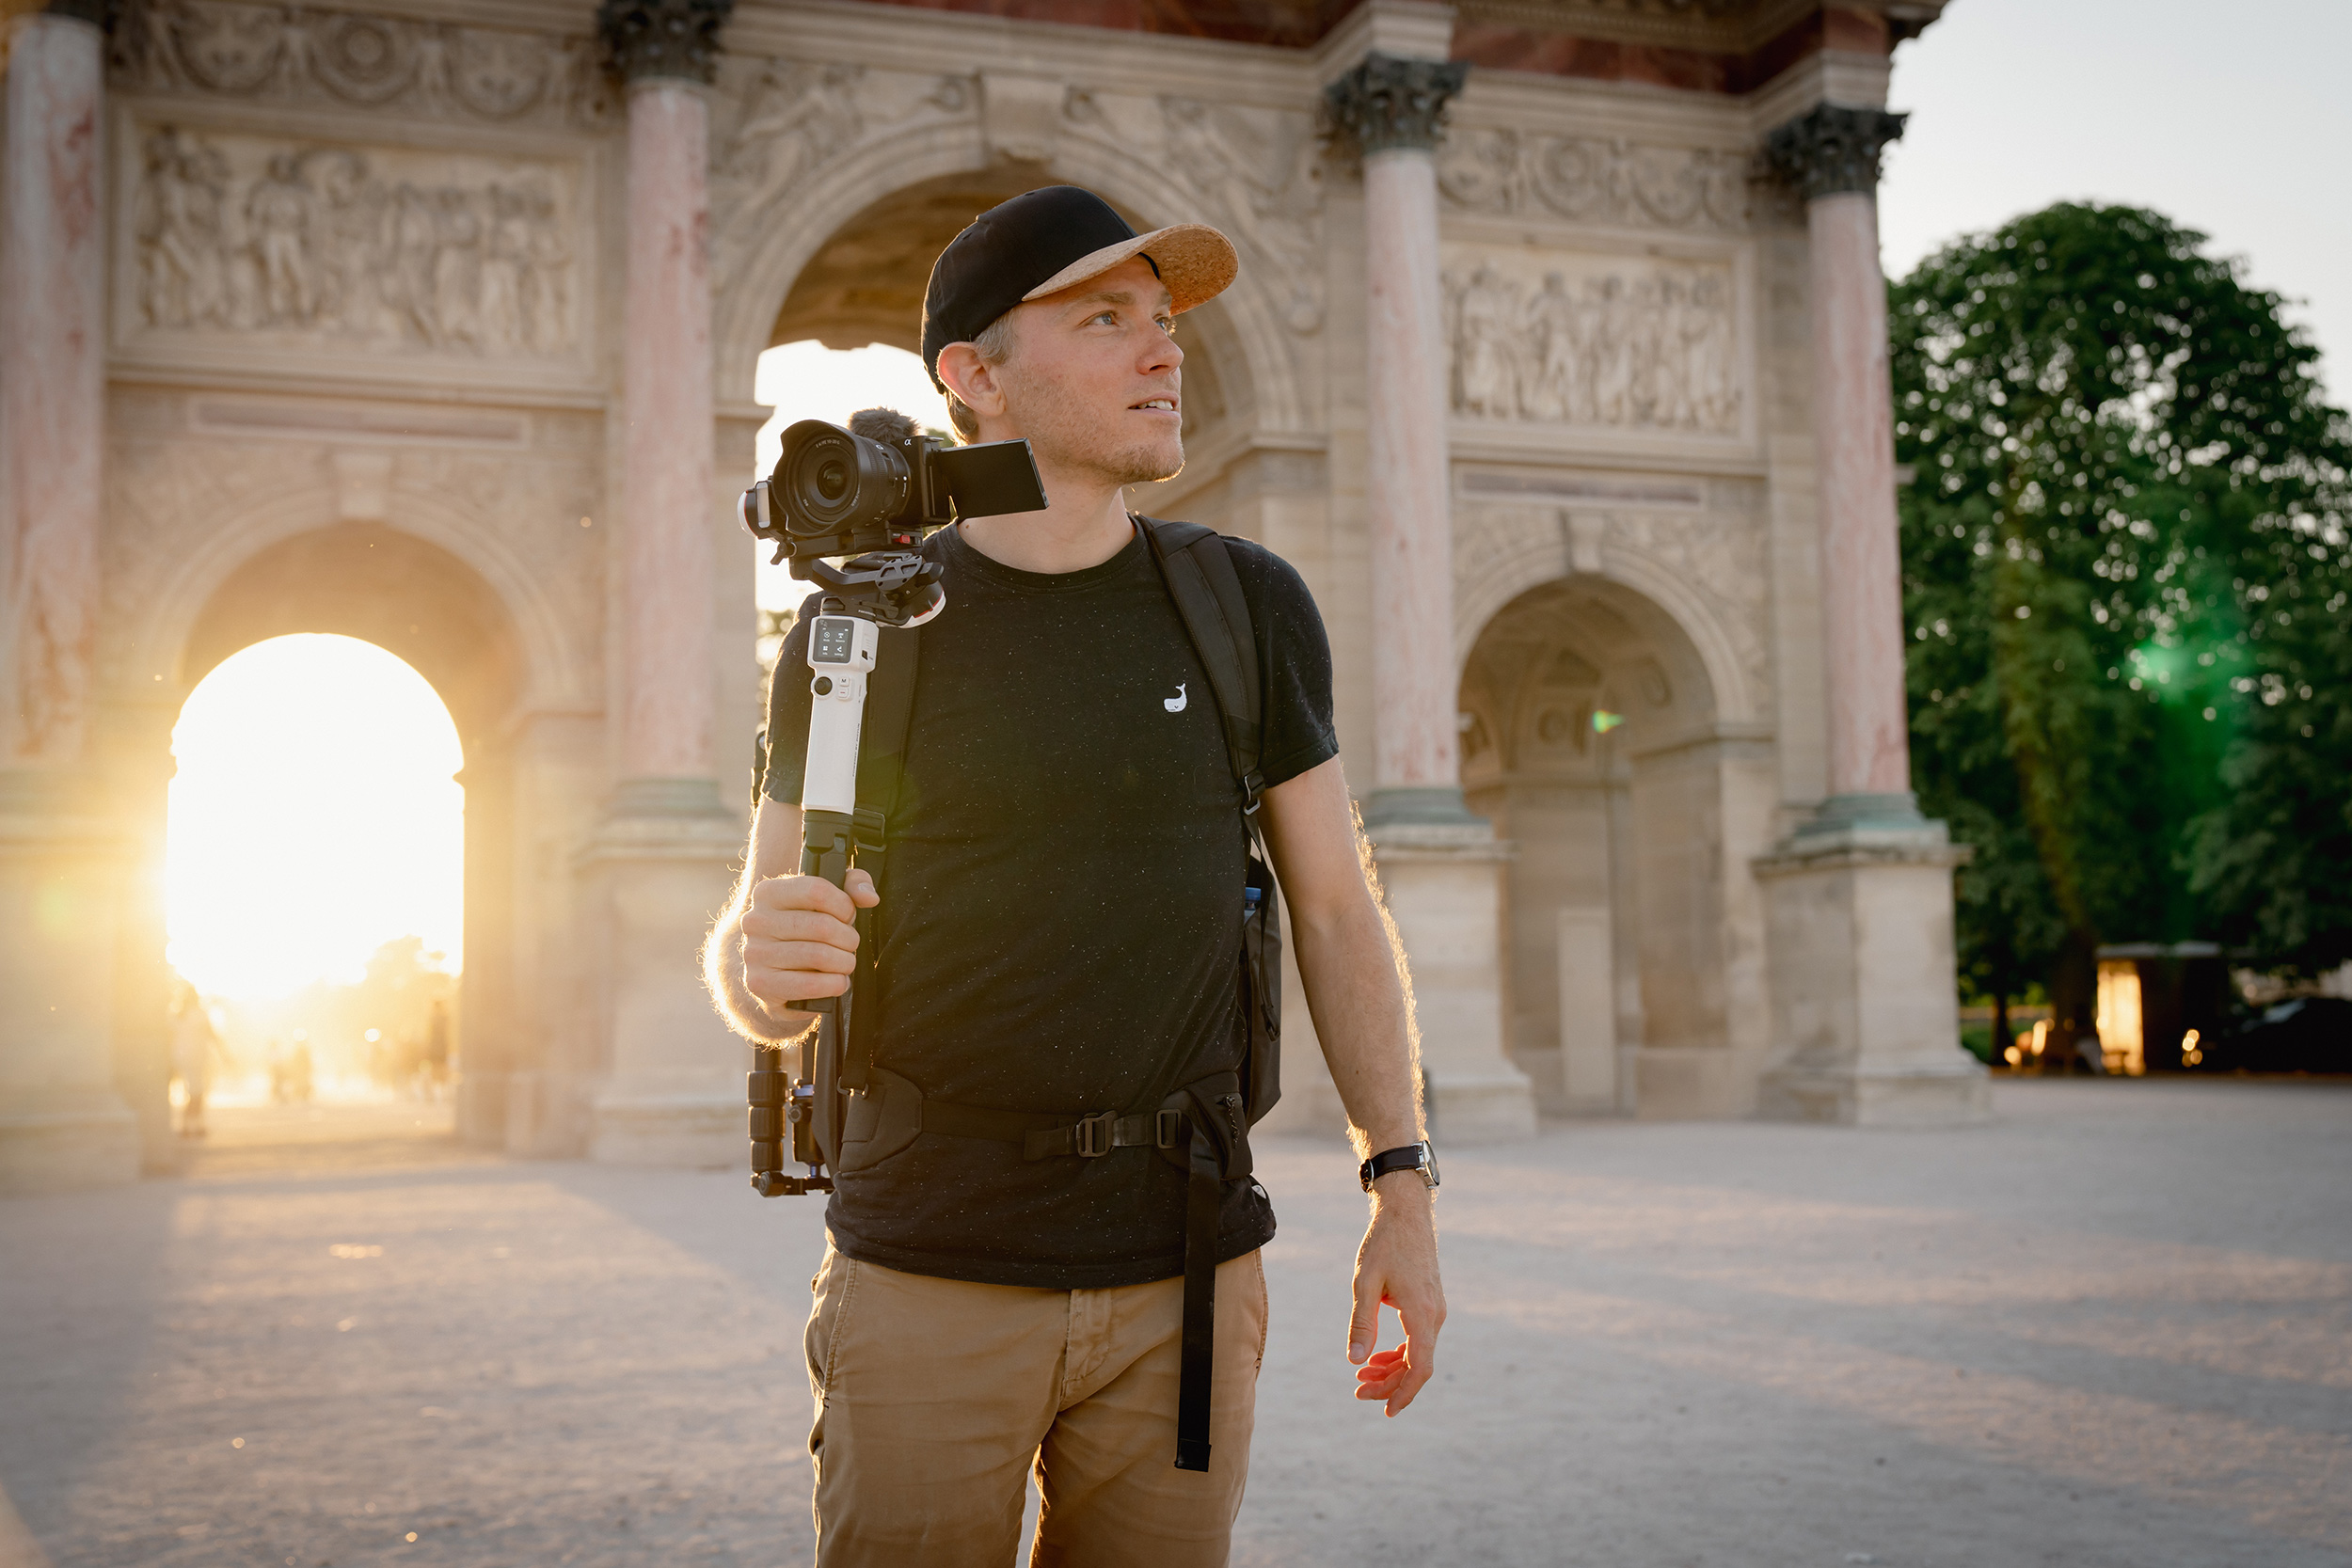 man-holding-a-gimbal-with-a-sony-camera-mounted-on-it.jpeg